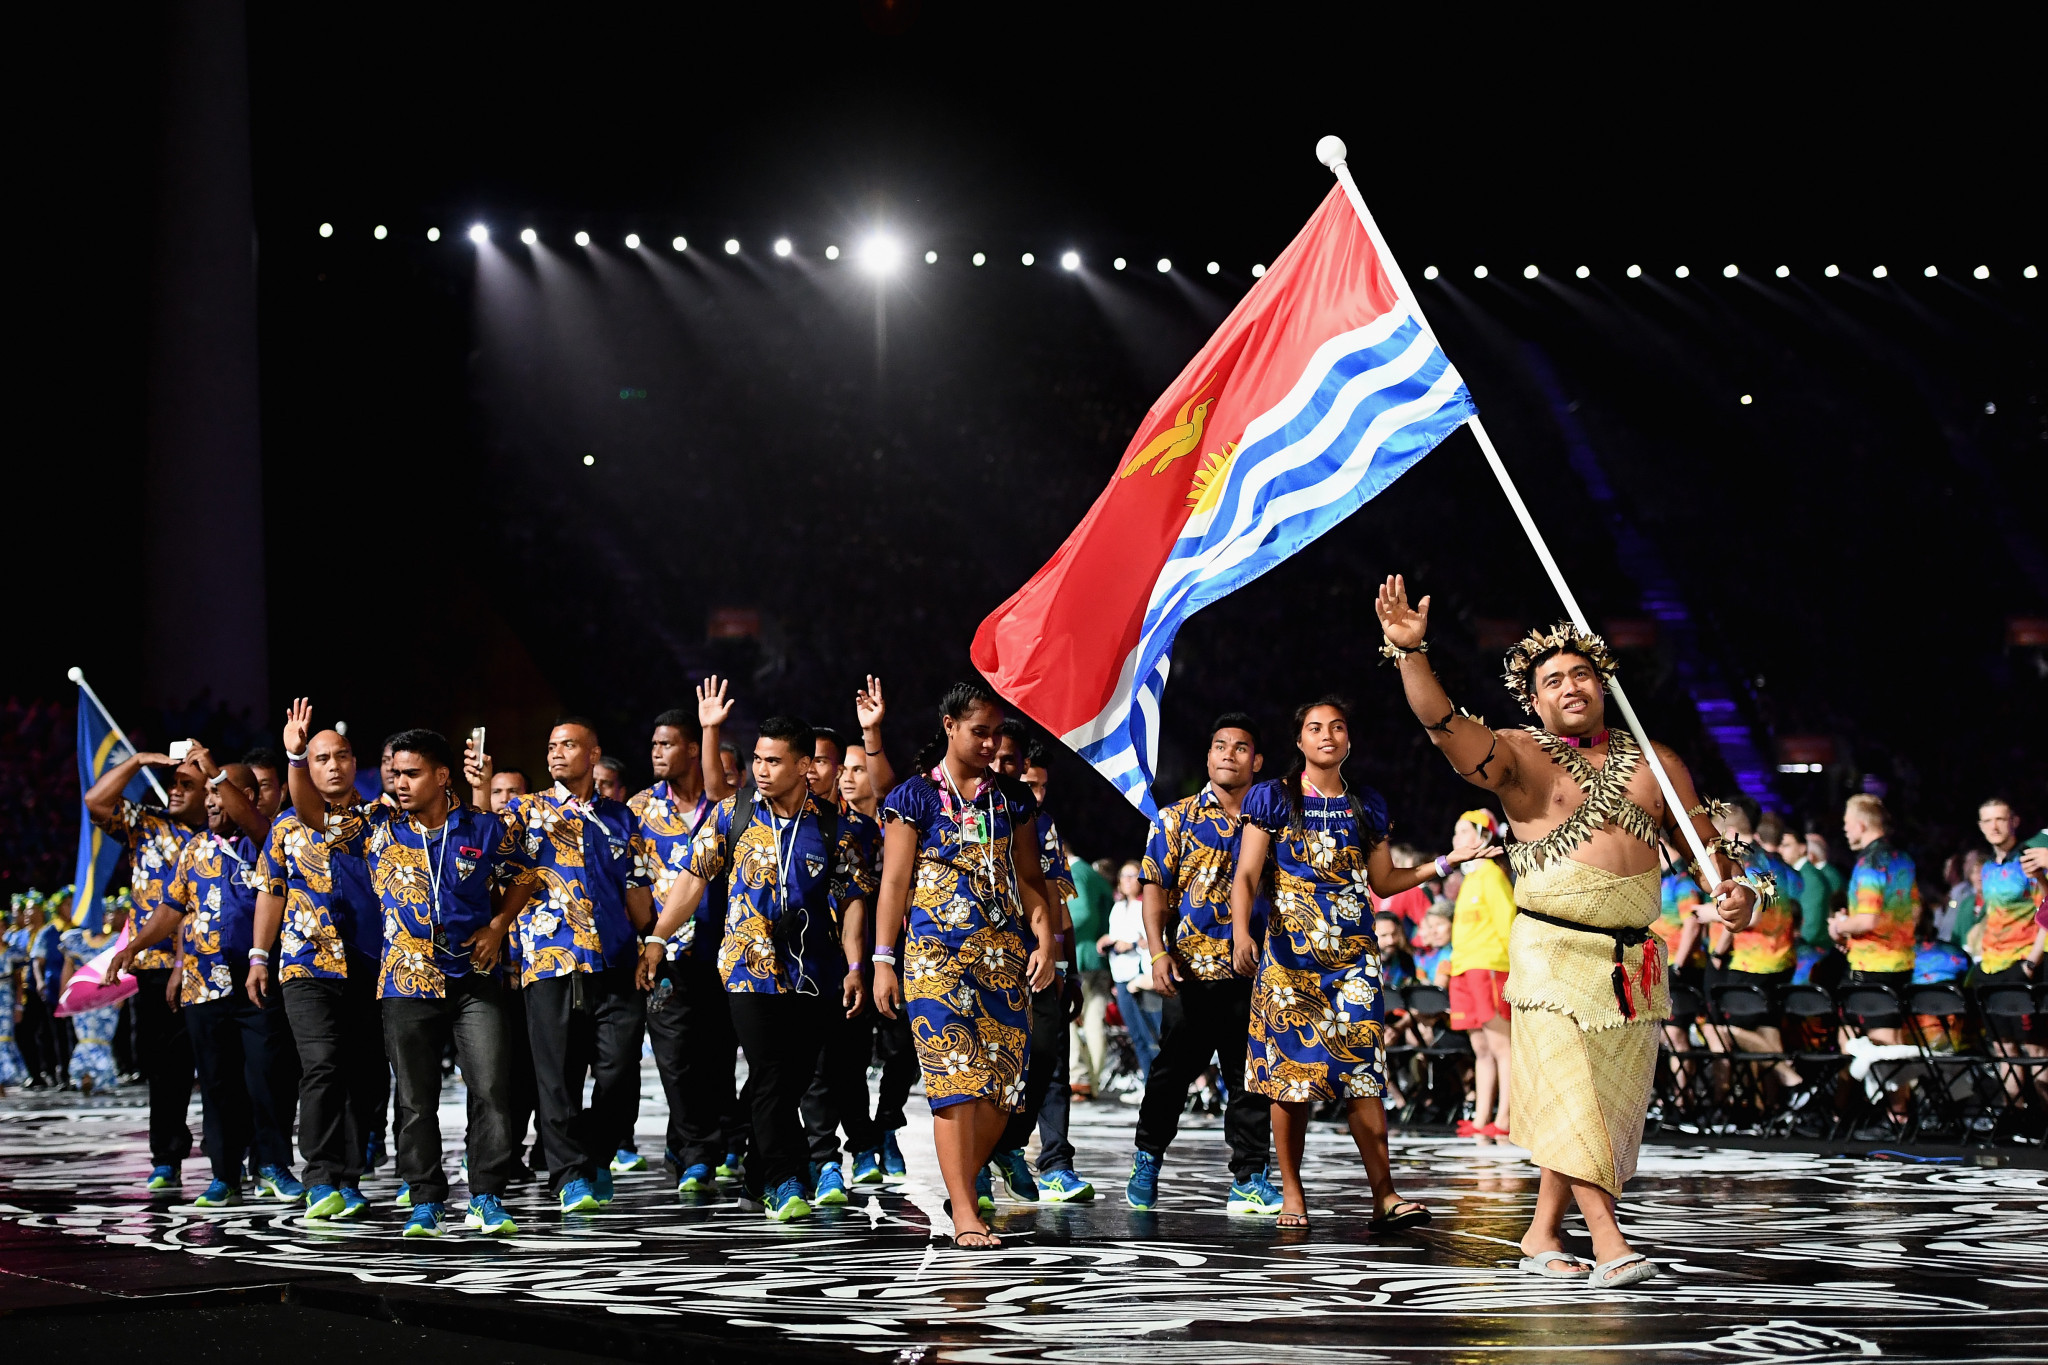 Kiribati has competed at every Commonwealth Games since debuting in 1998 ©Getty Images